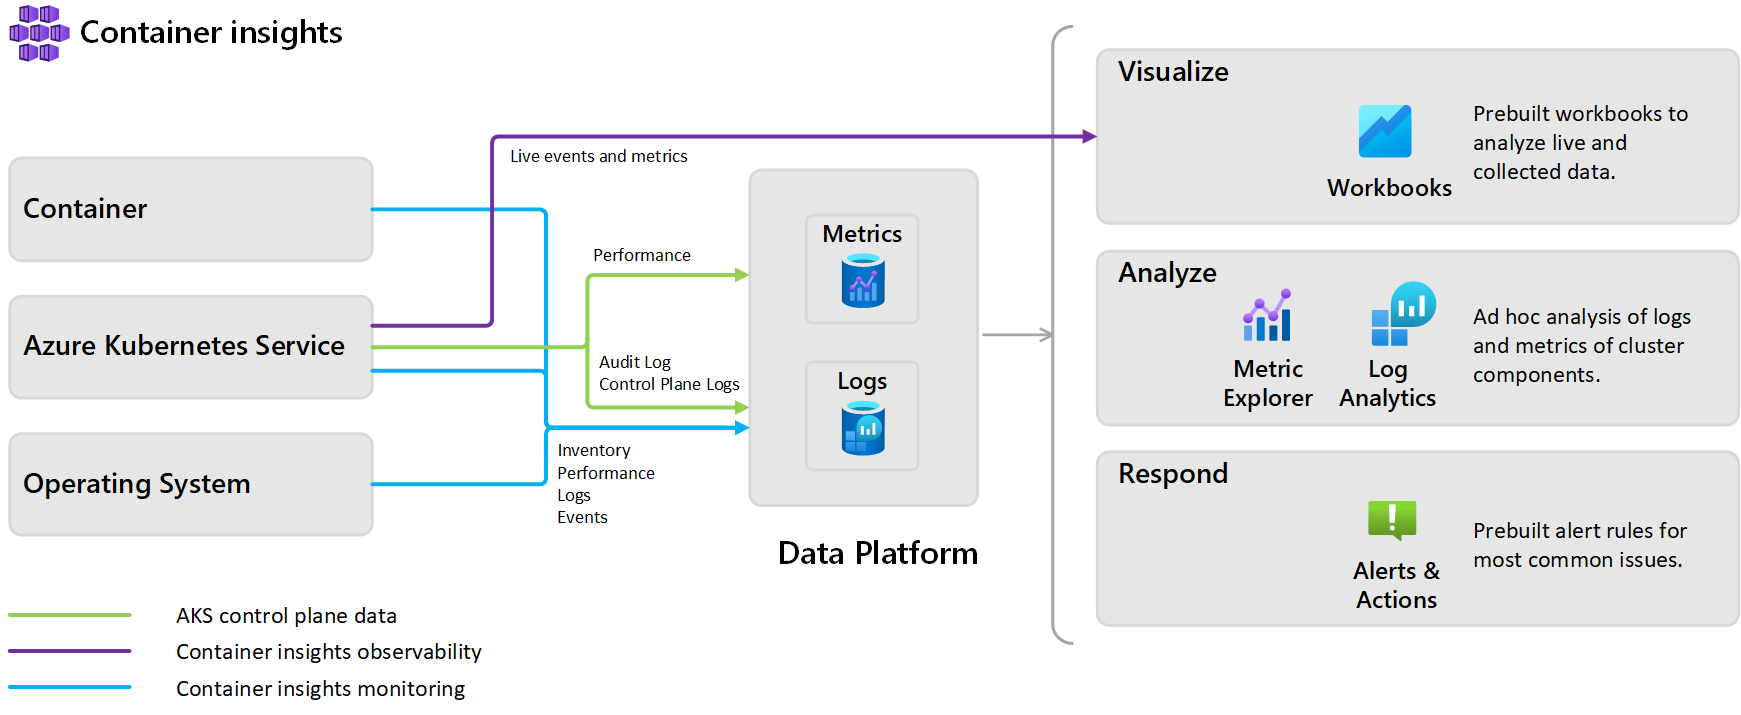 Overview diagram of Container insights